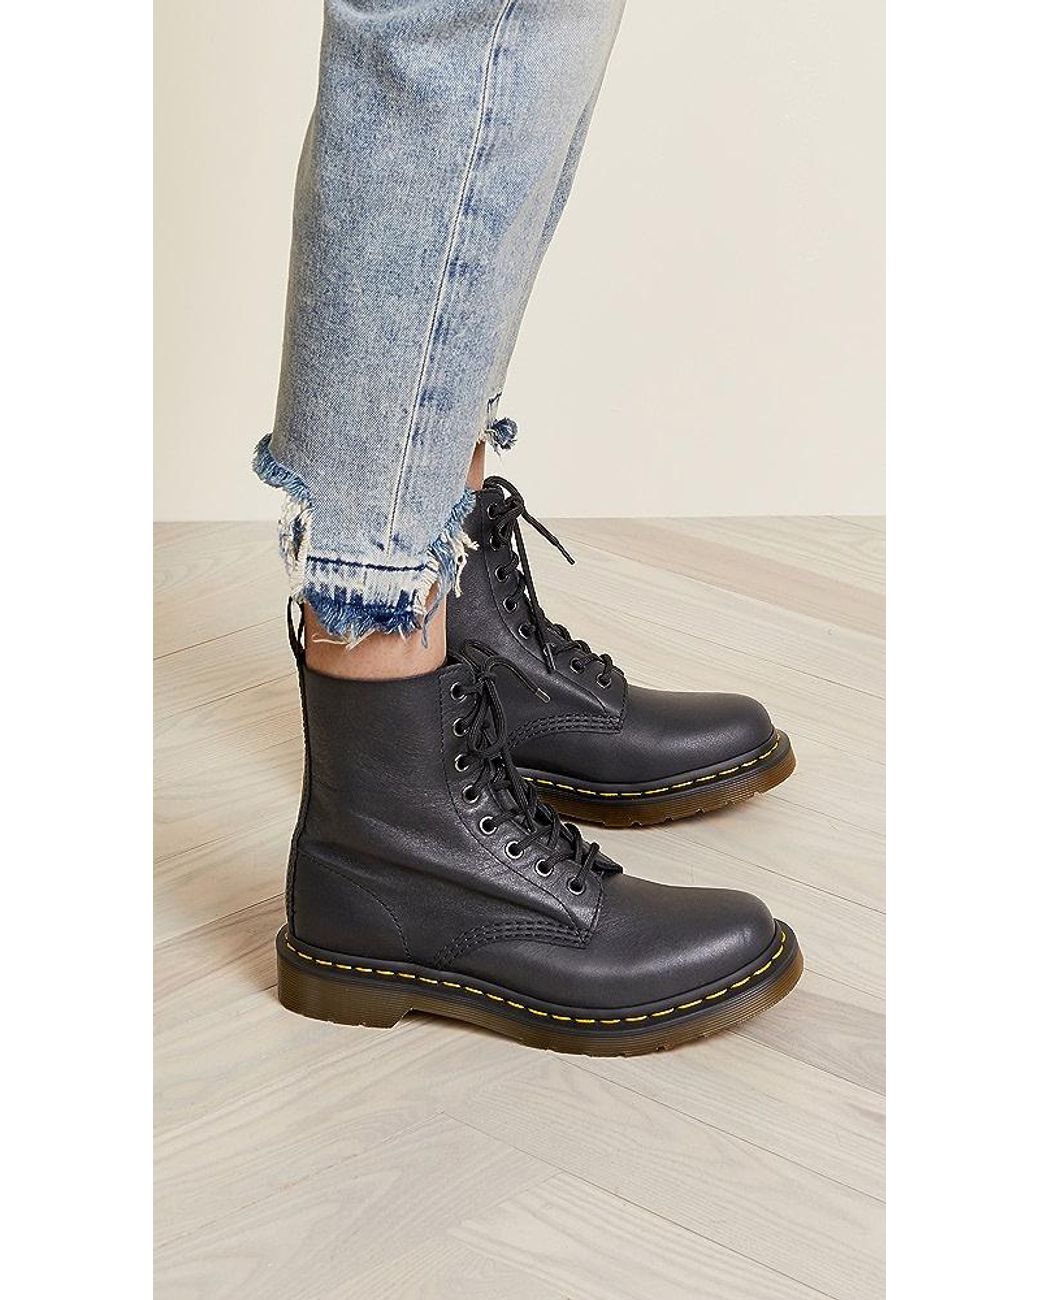 Dr. Martens 1460 Pascal Virginia 8 Eye Boots in Black | Lyst